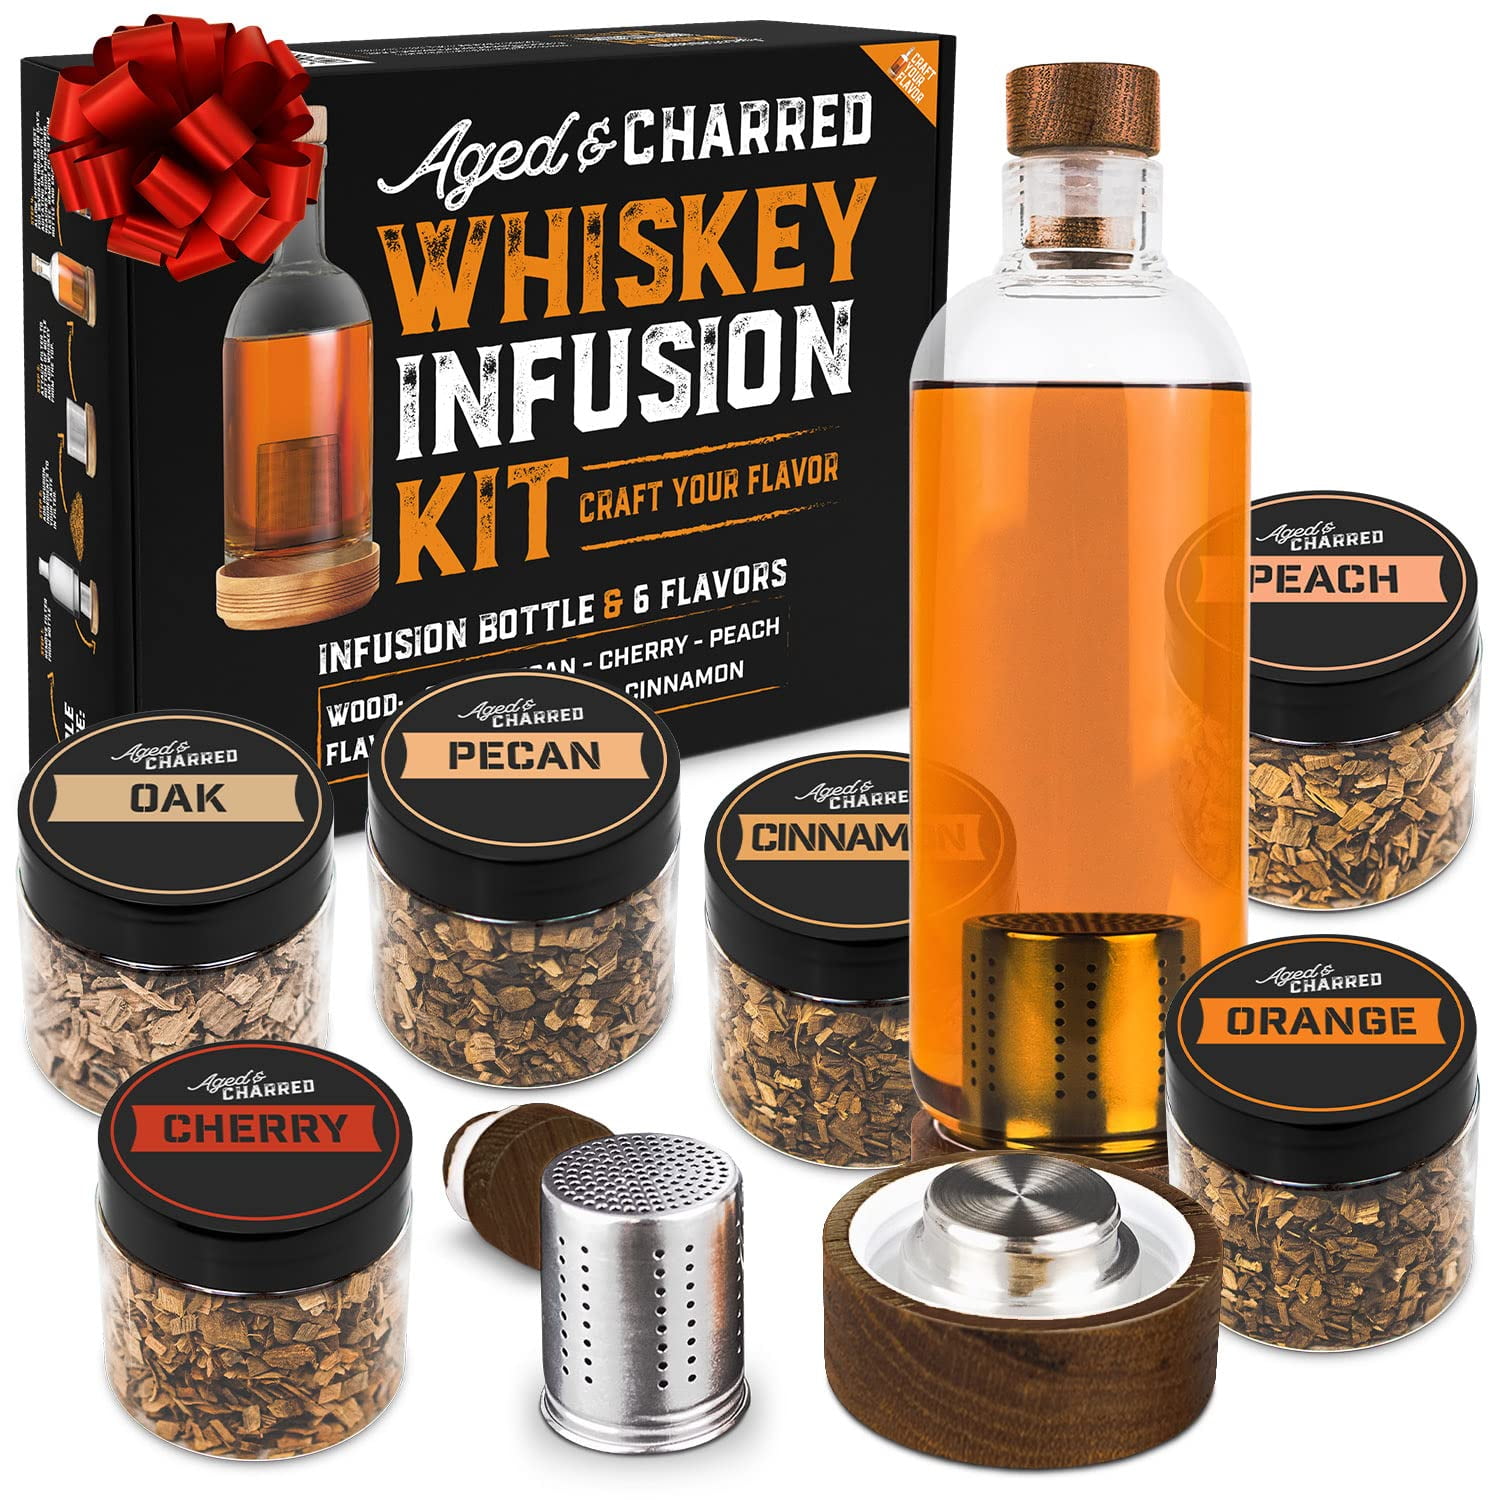 Do Your Whisky Infusion | DIY Kit for Homemade Whisky Flavor | Original Gift Set